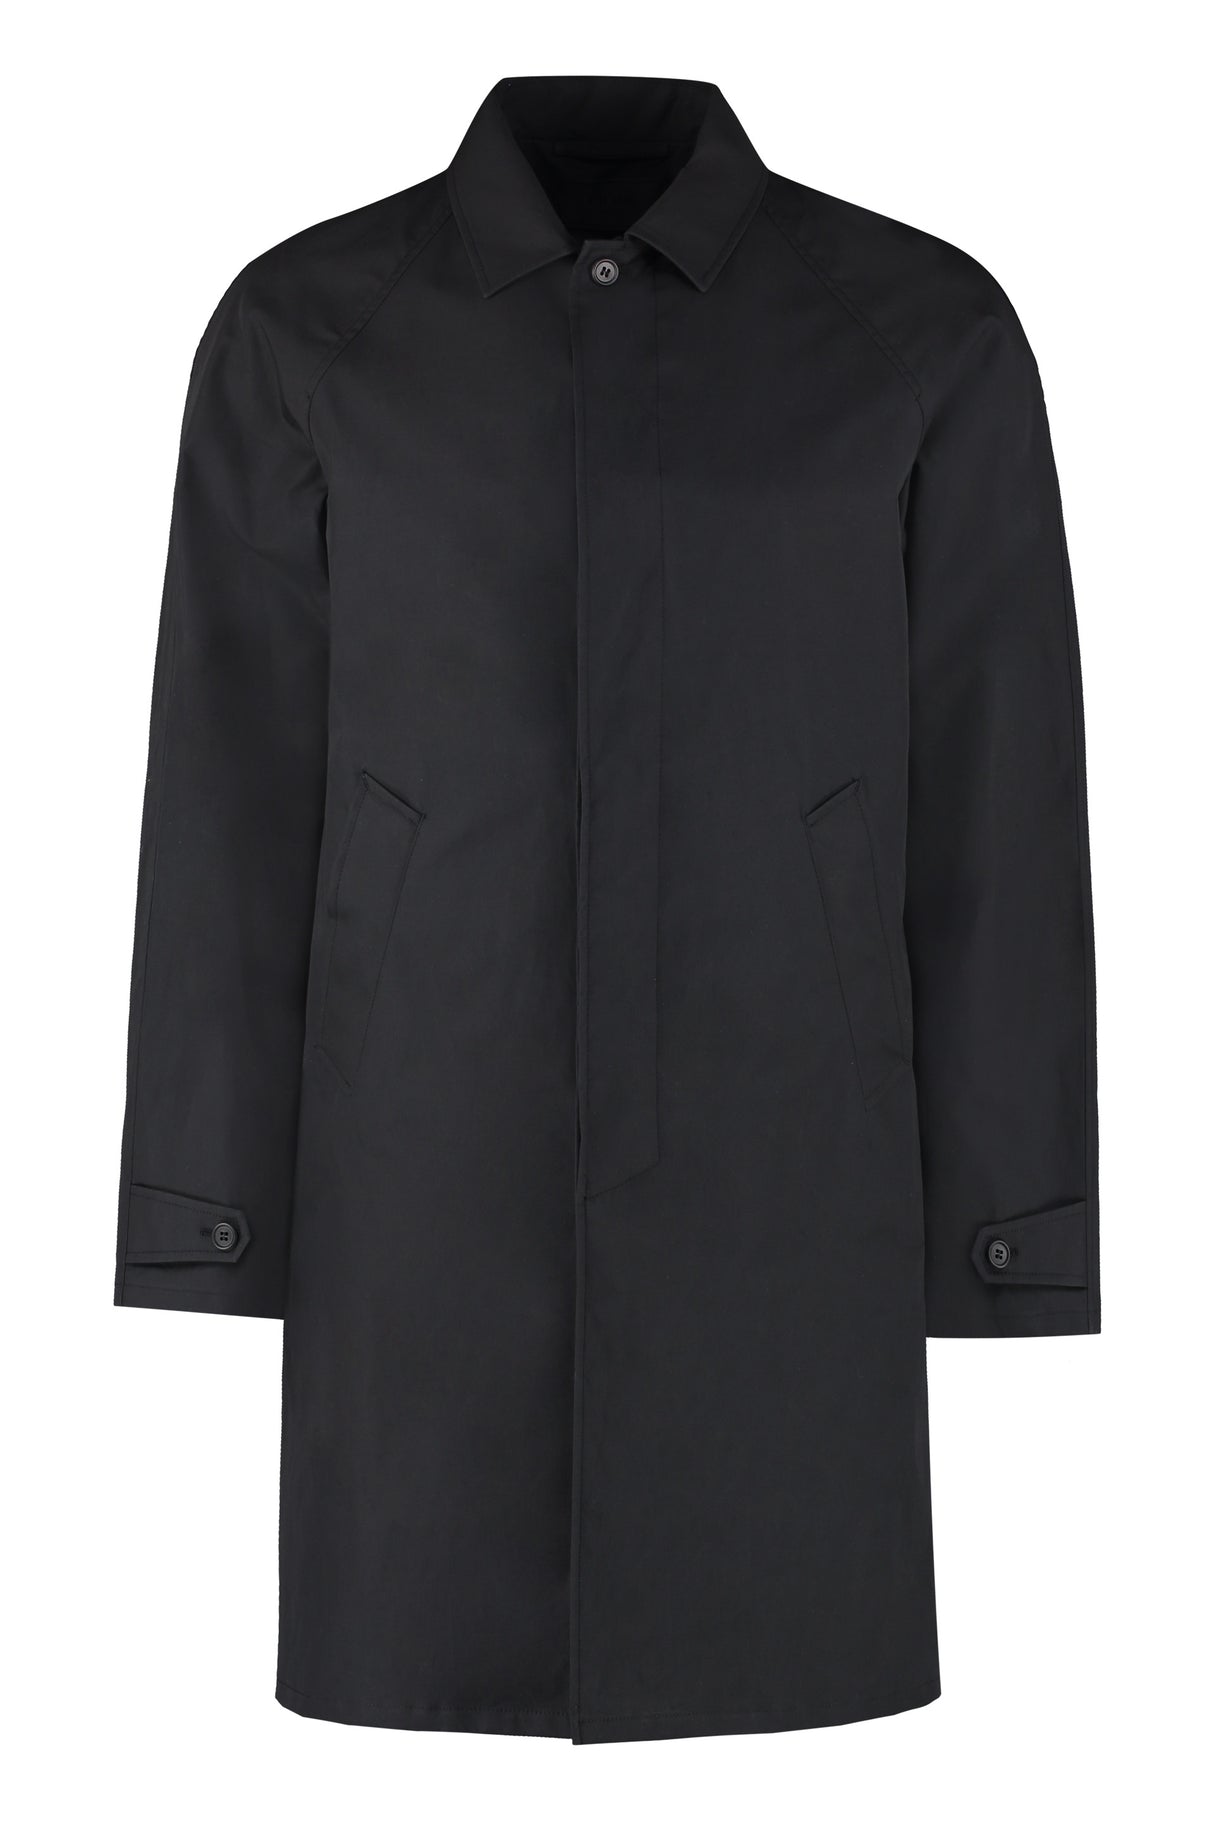 PRADA Classic Black Trench Jacket for Men - Seasonal Must-Have for 2024